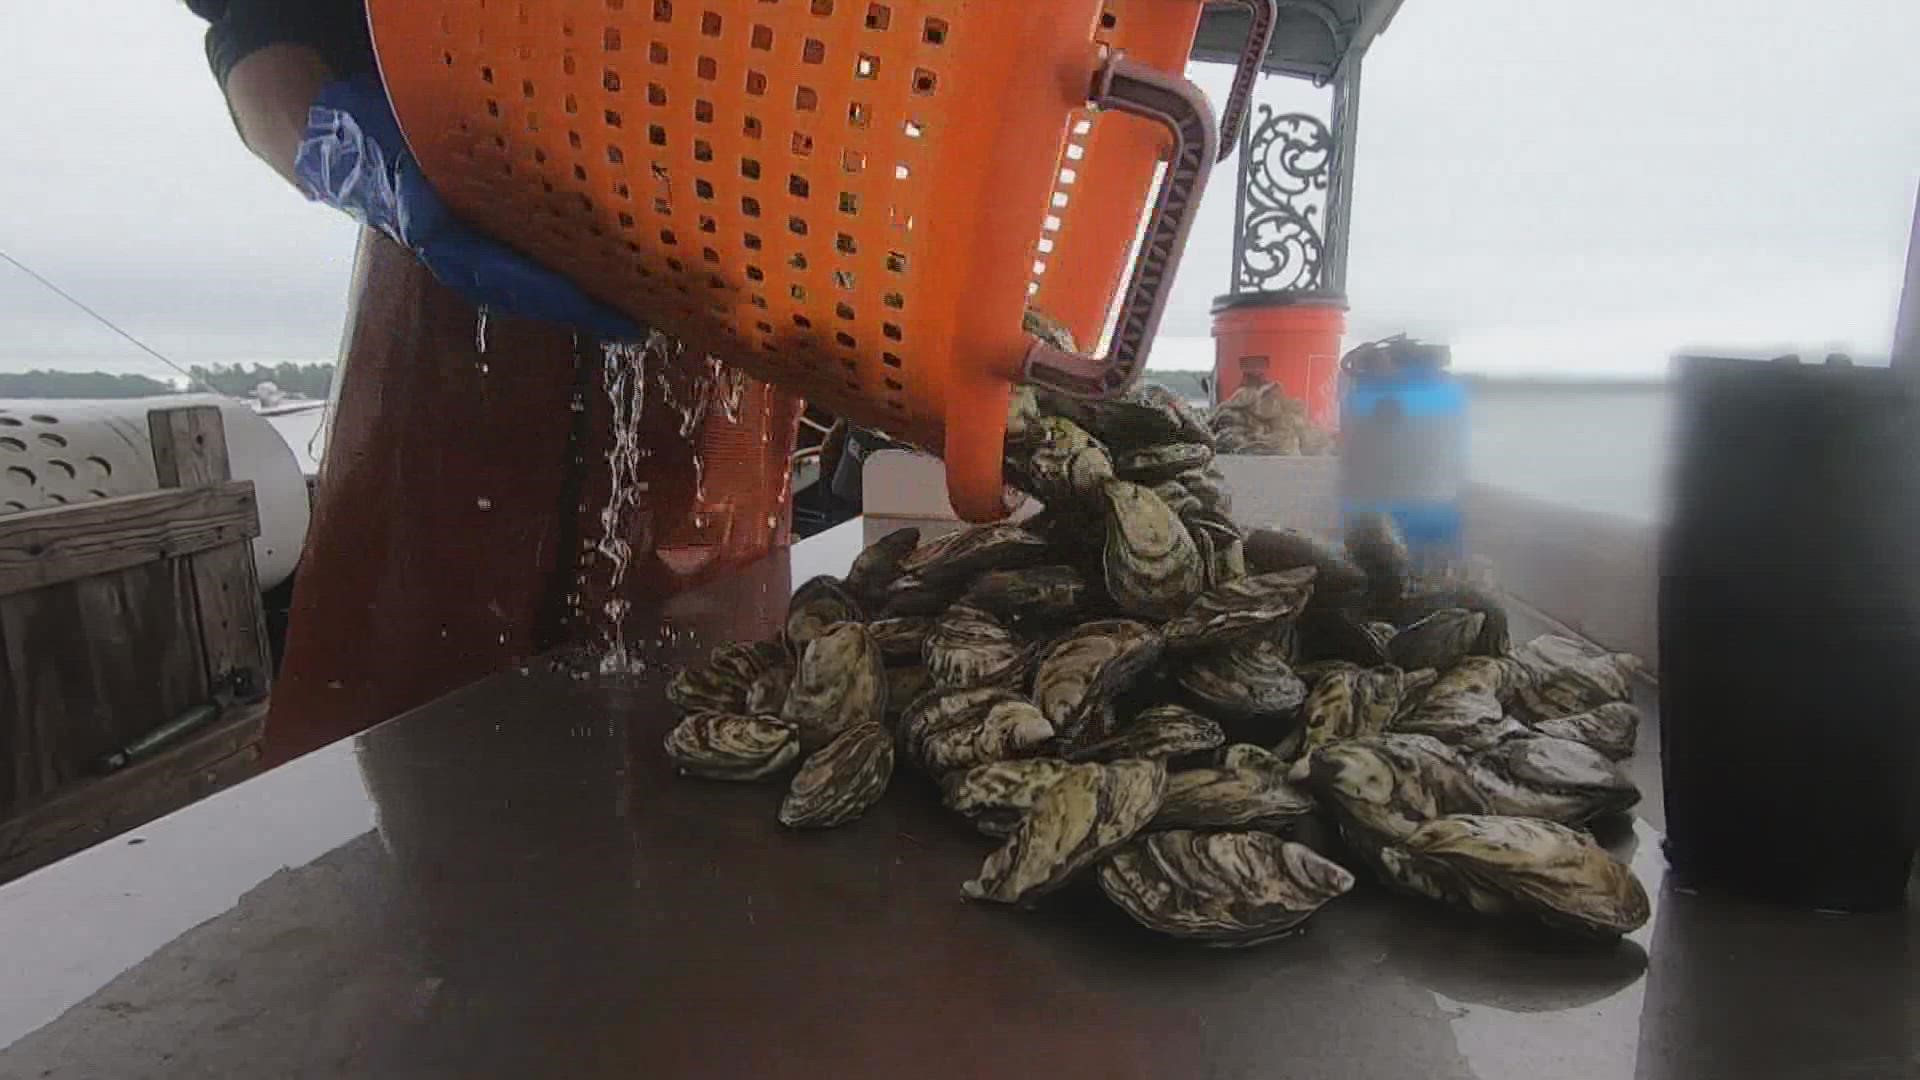 Maine is seeing more oyster farmers pop up along its coast, leading to more product, higher demand, and a big reputation for Maine's fourth most valuable seafood.